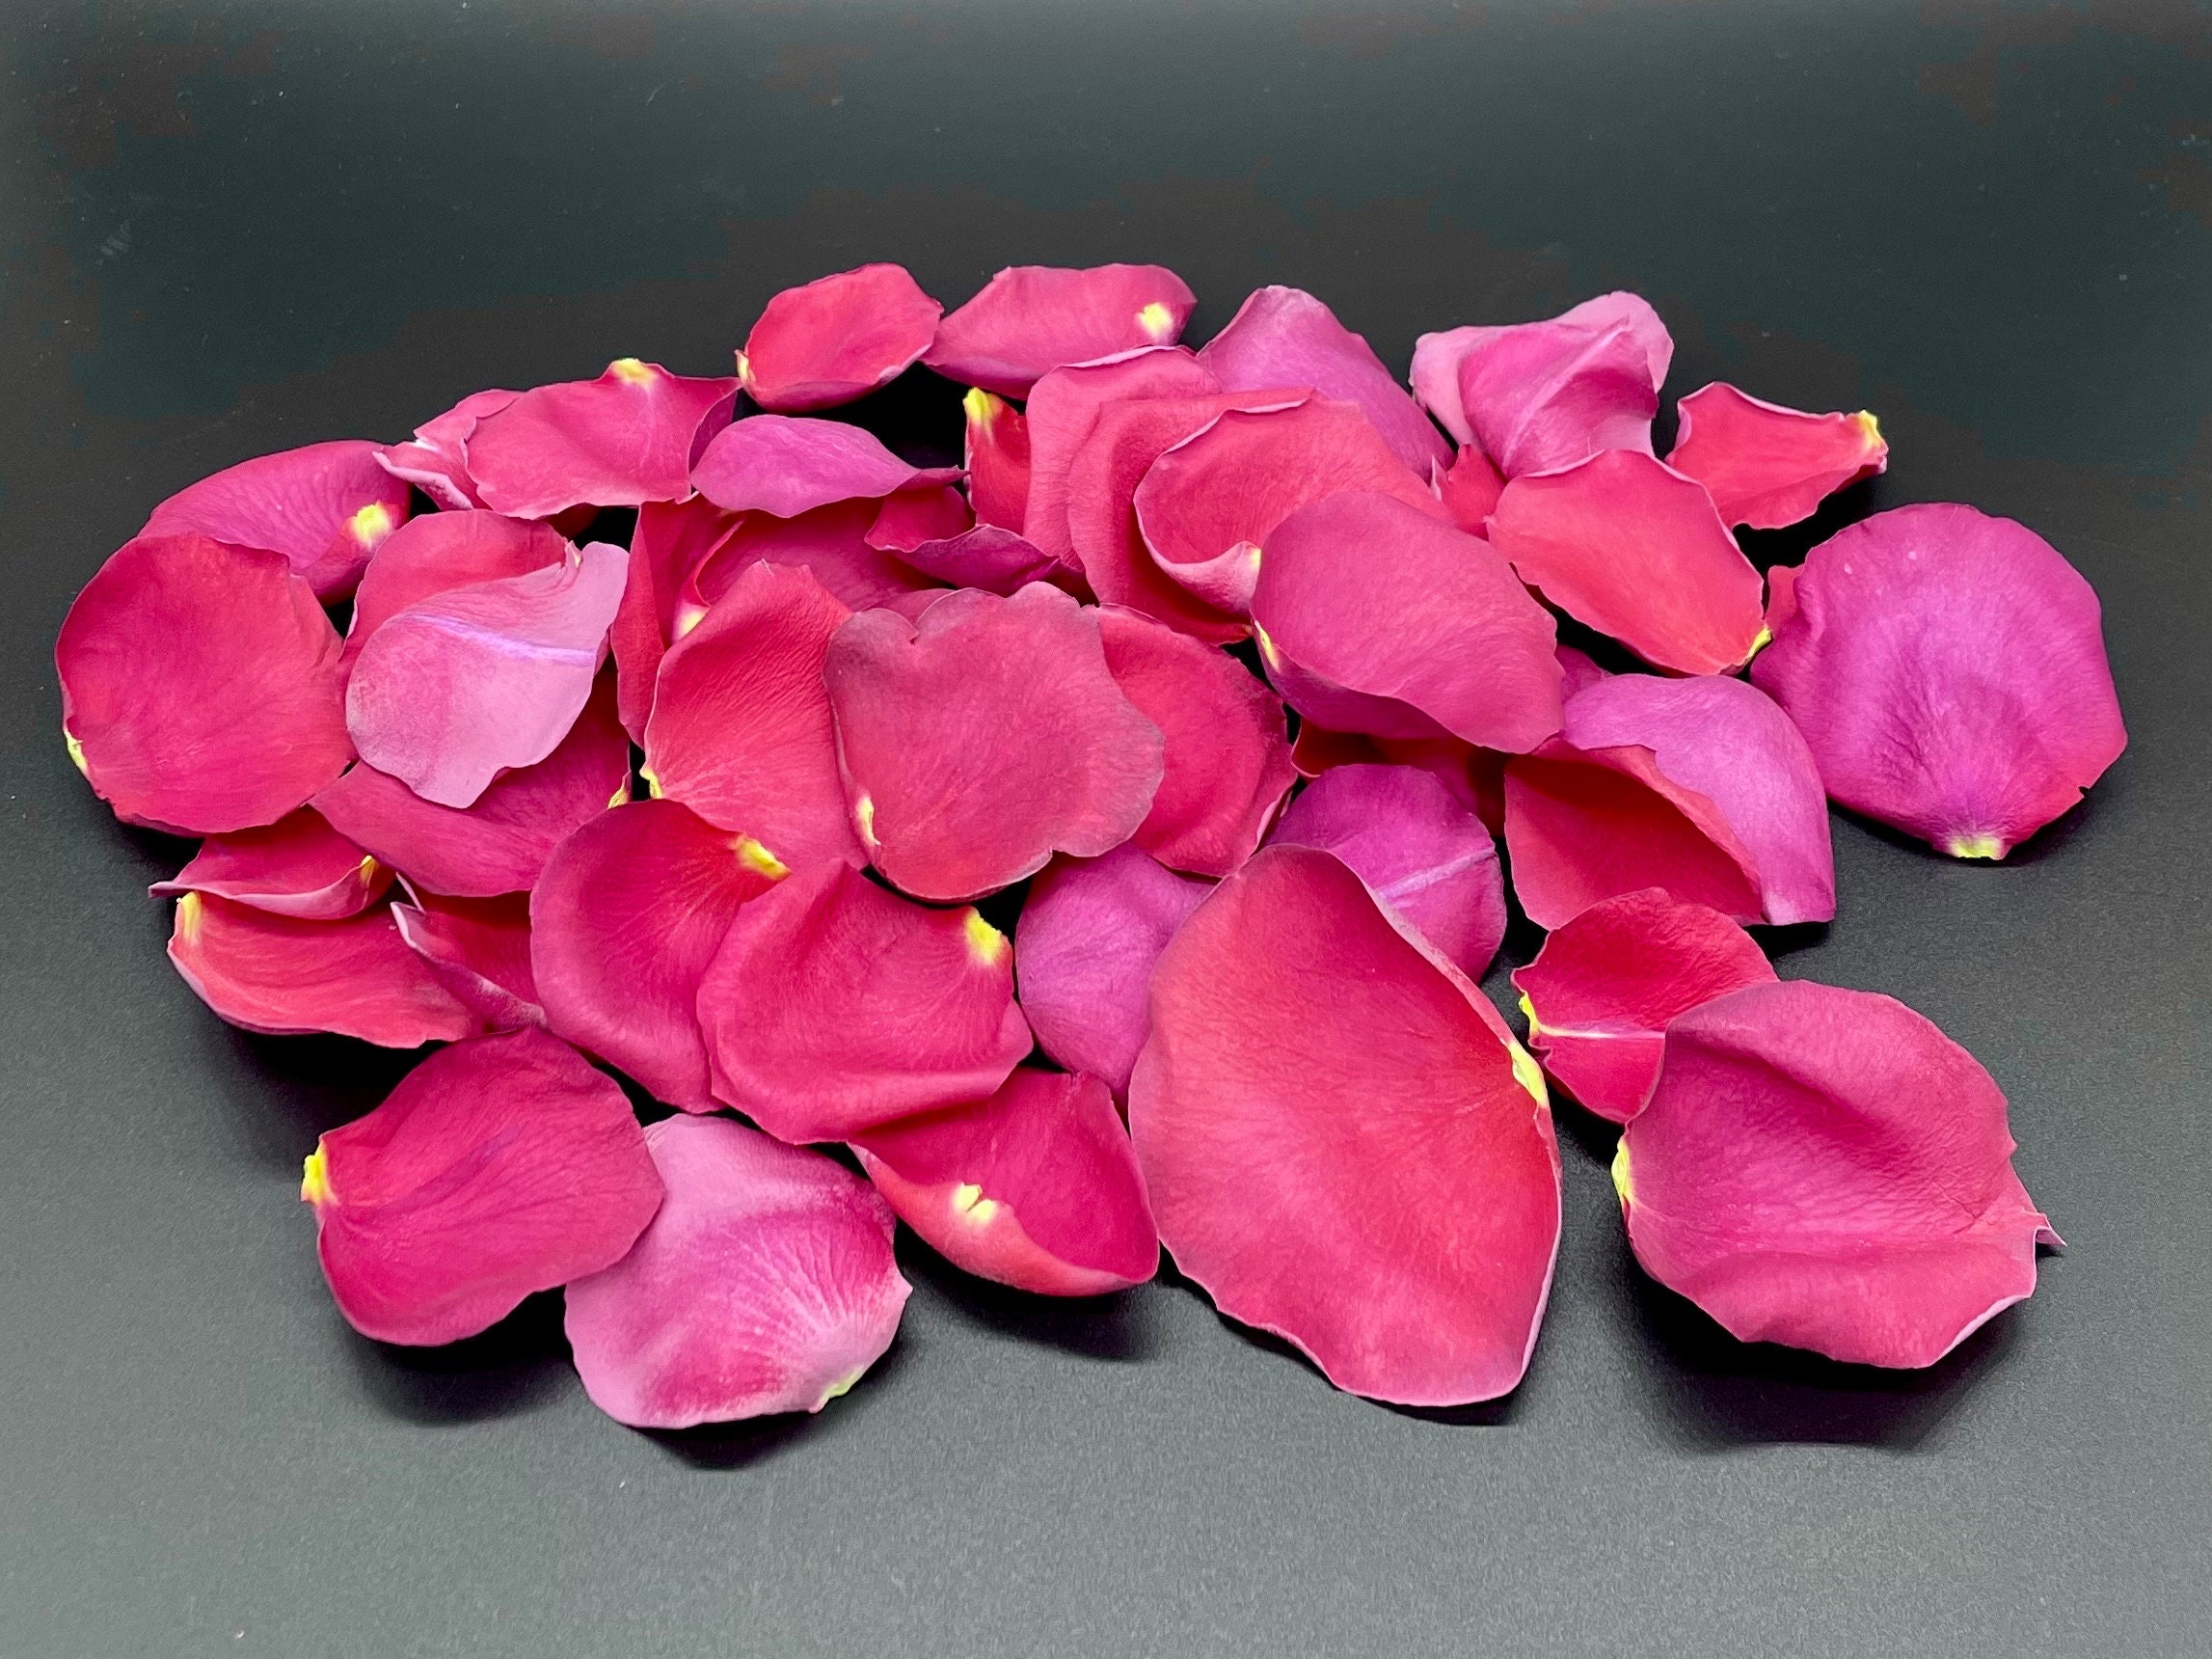 Freeze Dried Rose Petals, Ivory, 10 Cups of REAL Rose Petals for Weddings,  All Natural and Biodegradable, Ships Based on Event Date 